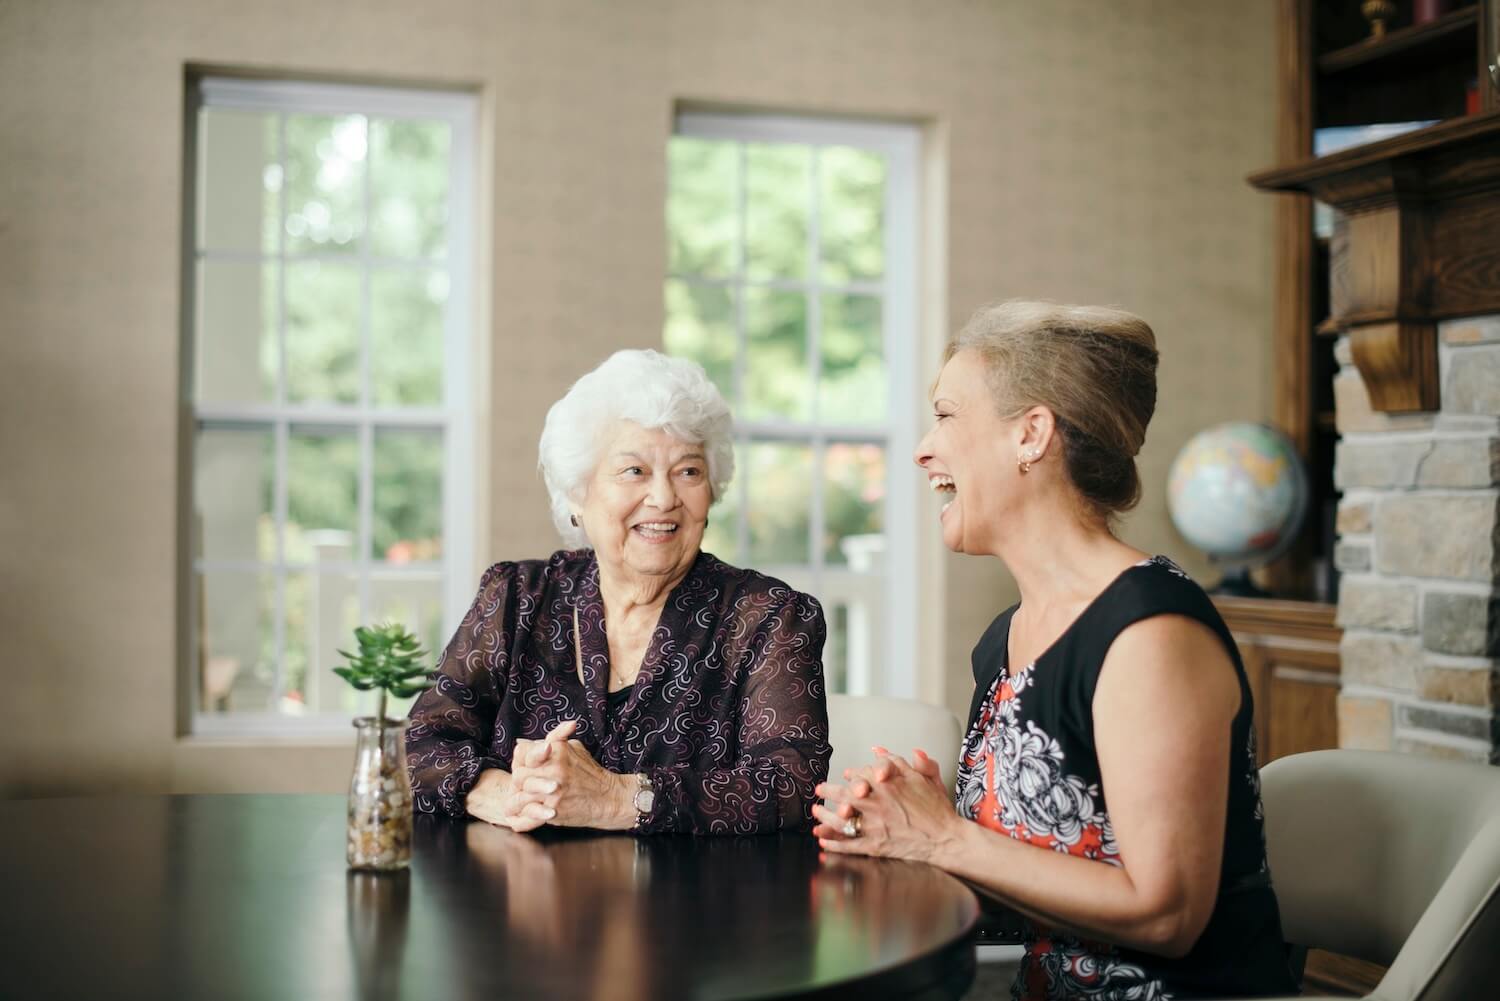 Resident and caregiver smiling and laughing together at a living room table